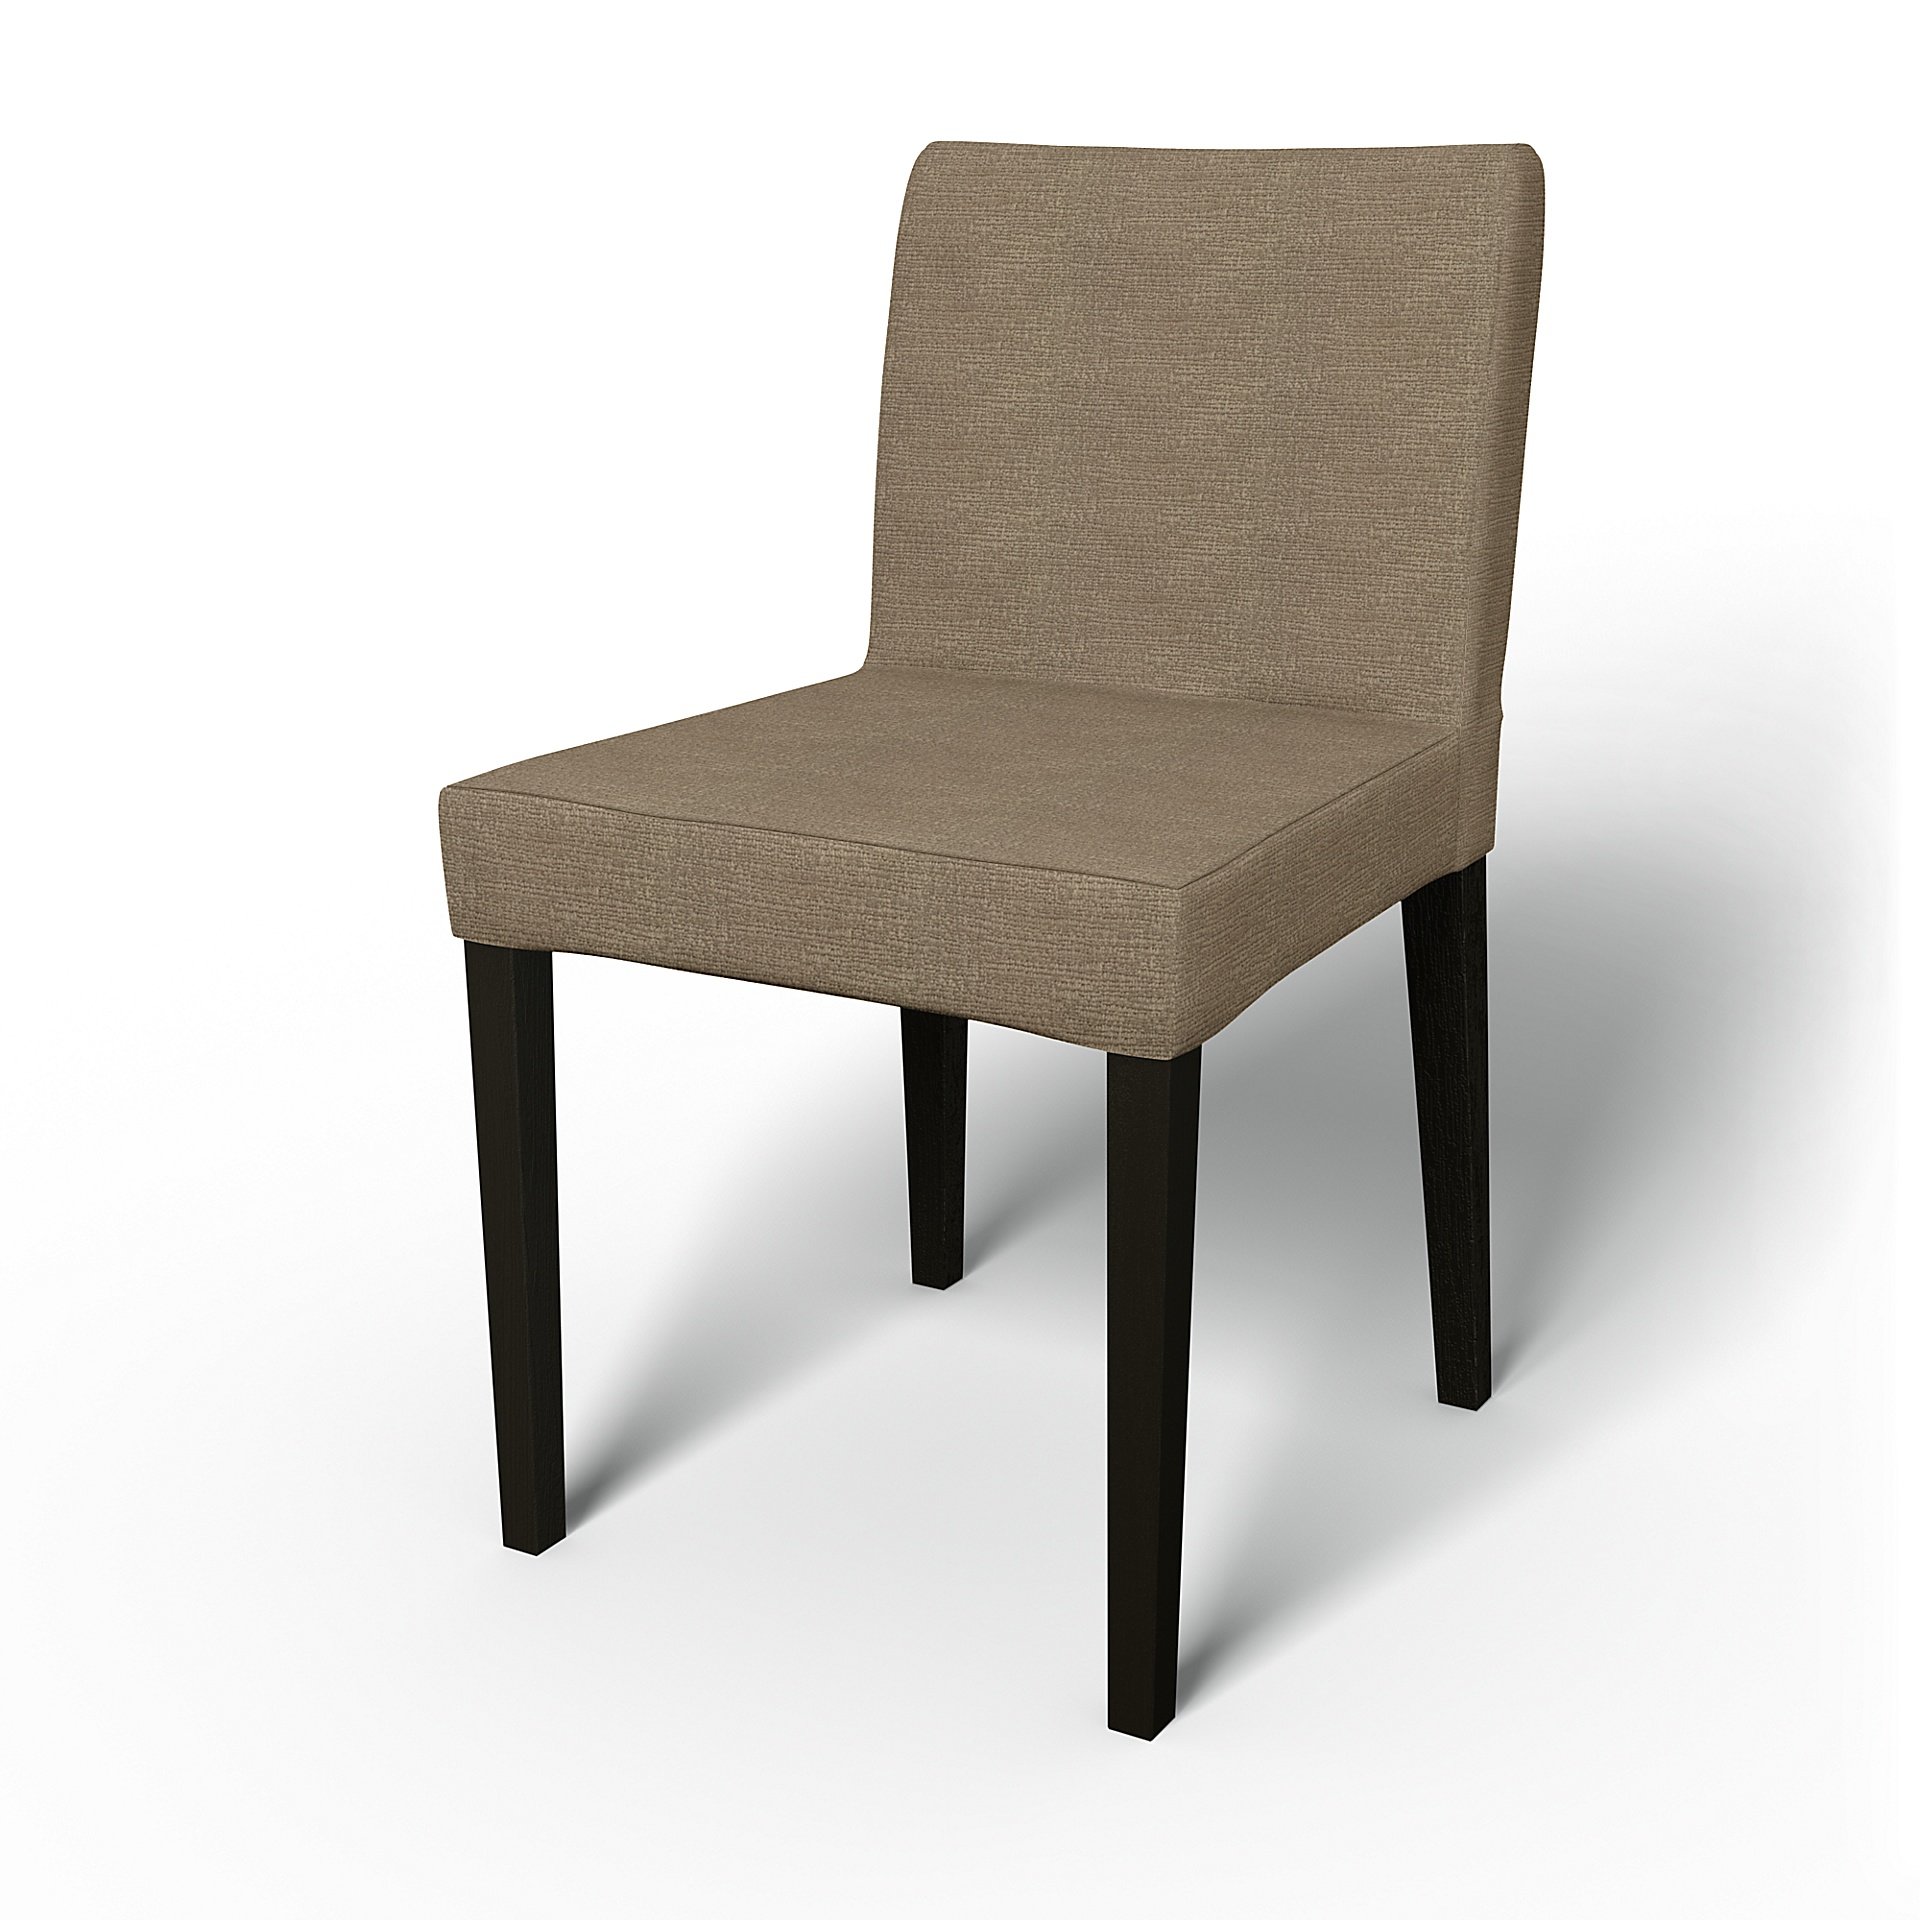 IKEA - Henrik Dining Chair Cover, Camel, Moody Seventies Collection - Bemz